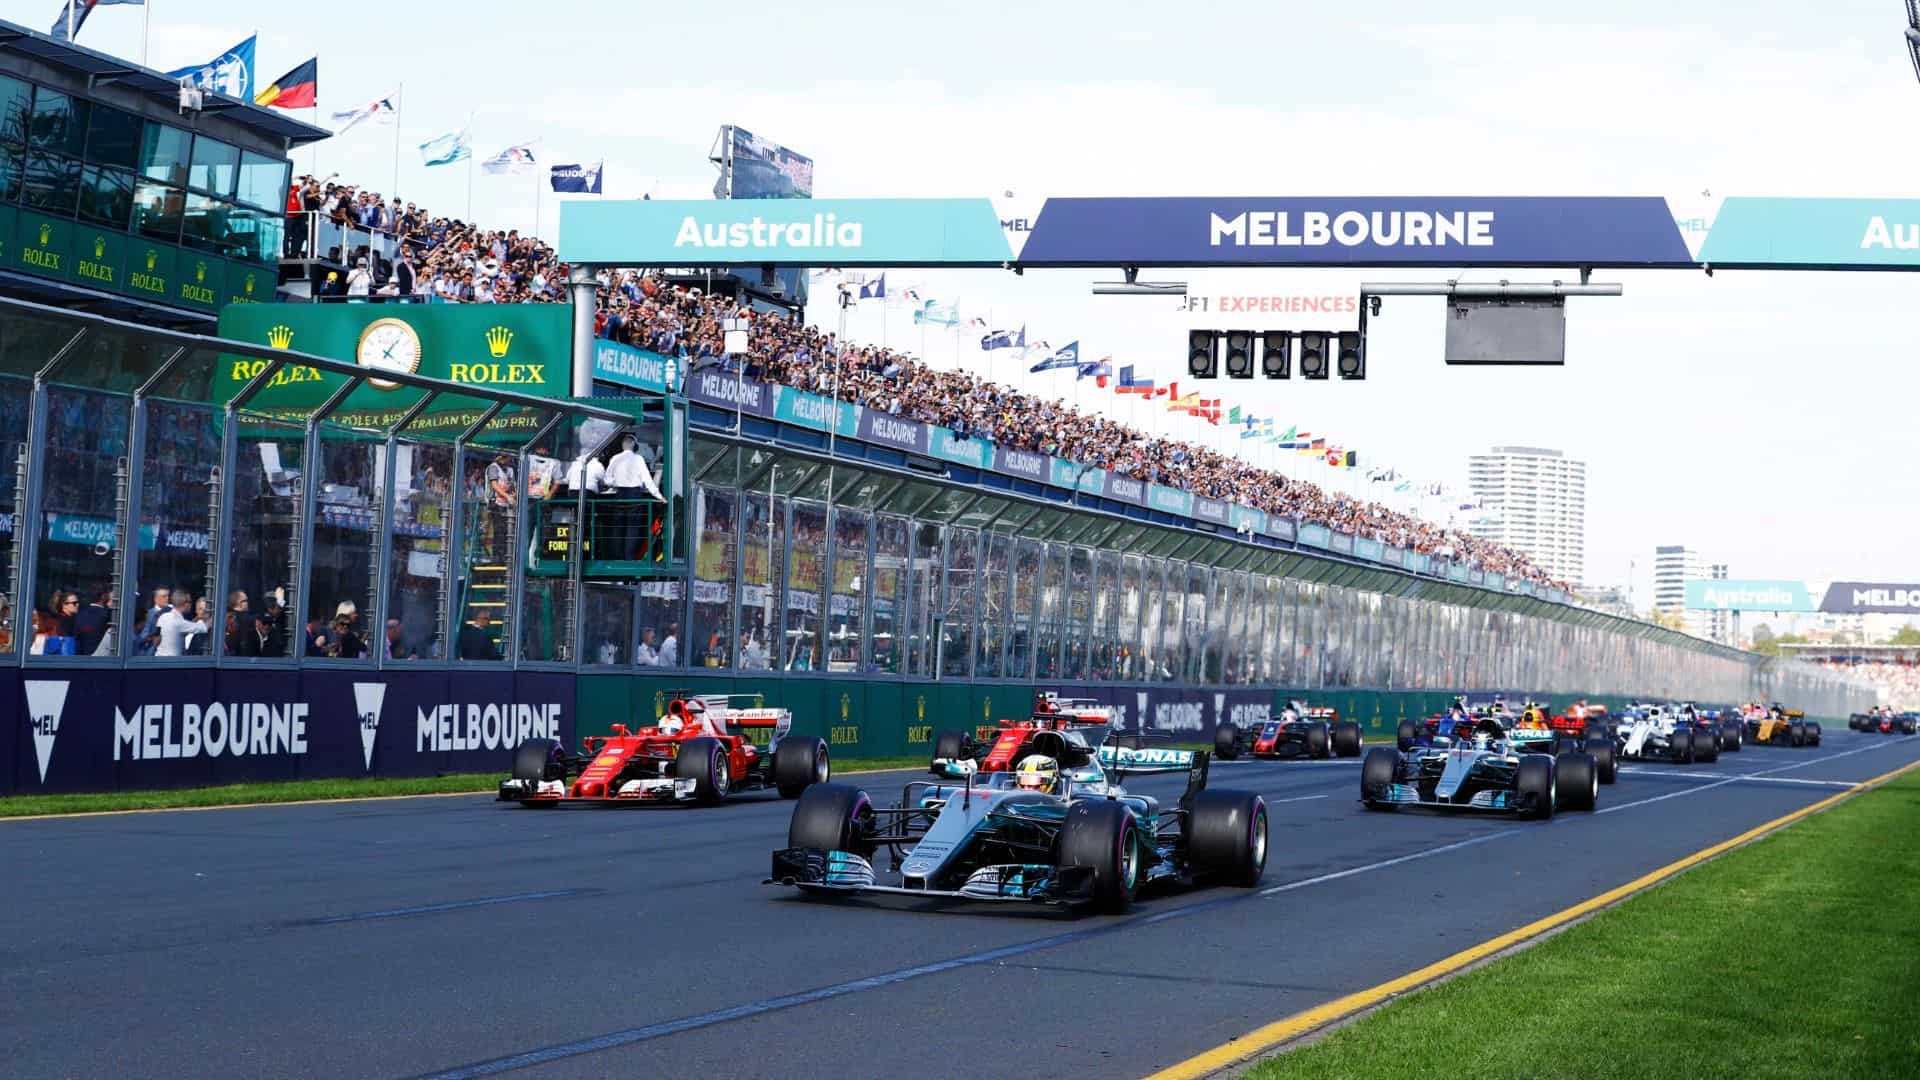 Official F1 Australian Grand Prix 2021 Packages & Tickets. Join Wait List